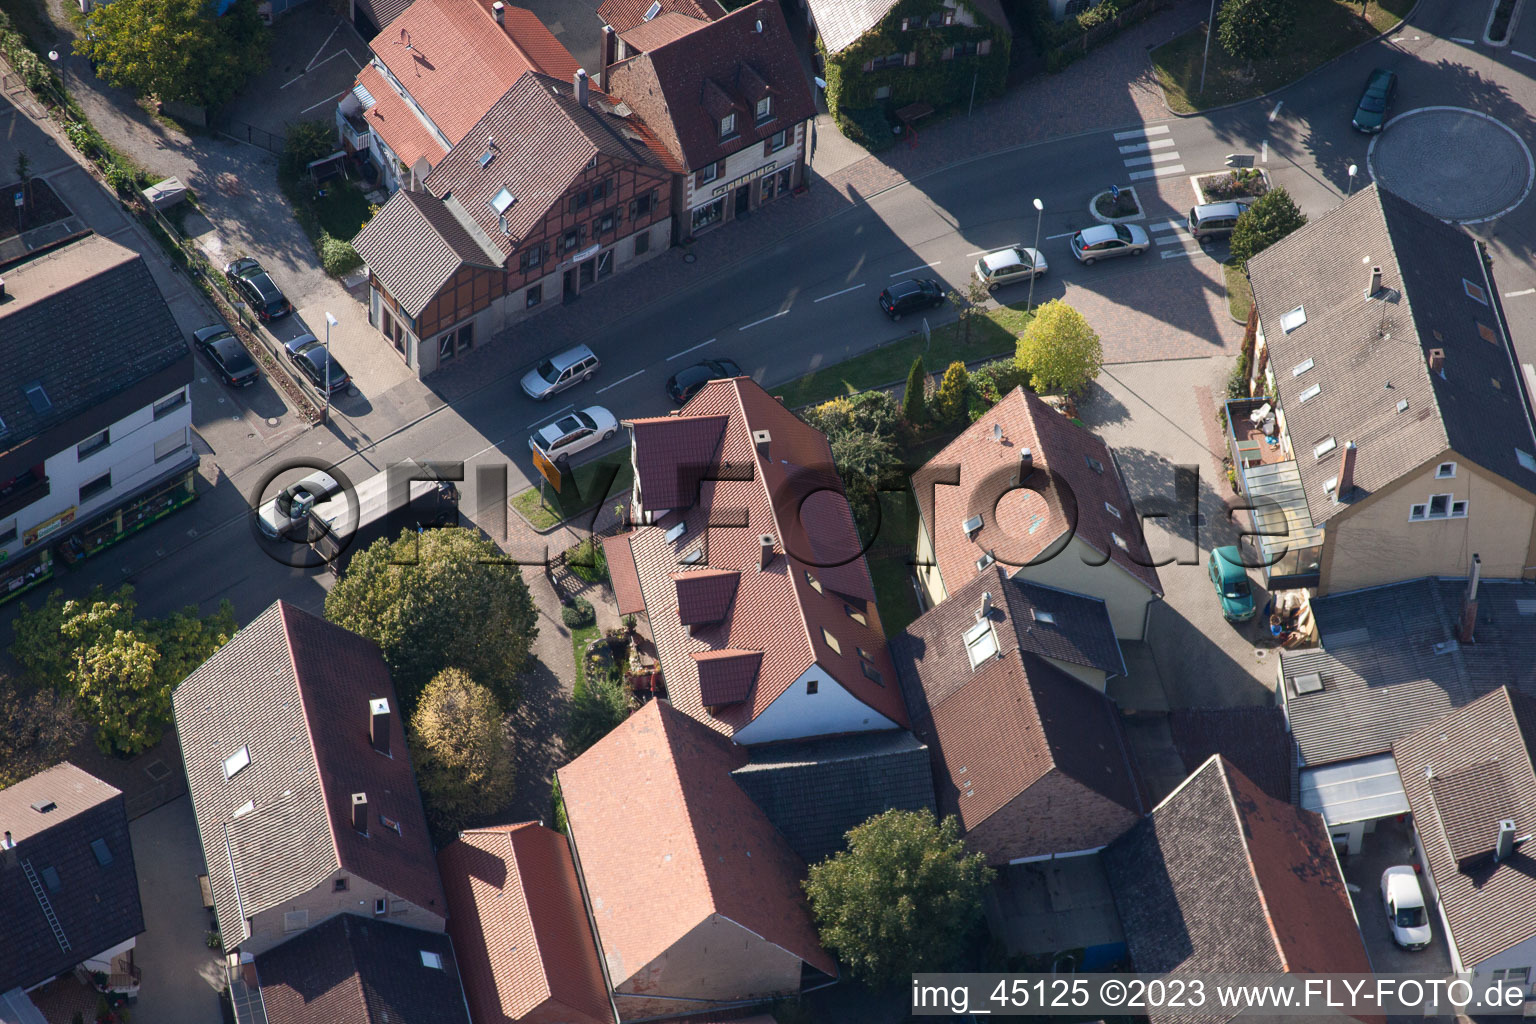 Hauptstr in the district Langensteinbach in Karlsbad in the state Baden-Wuerttemberg, Germany from above